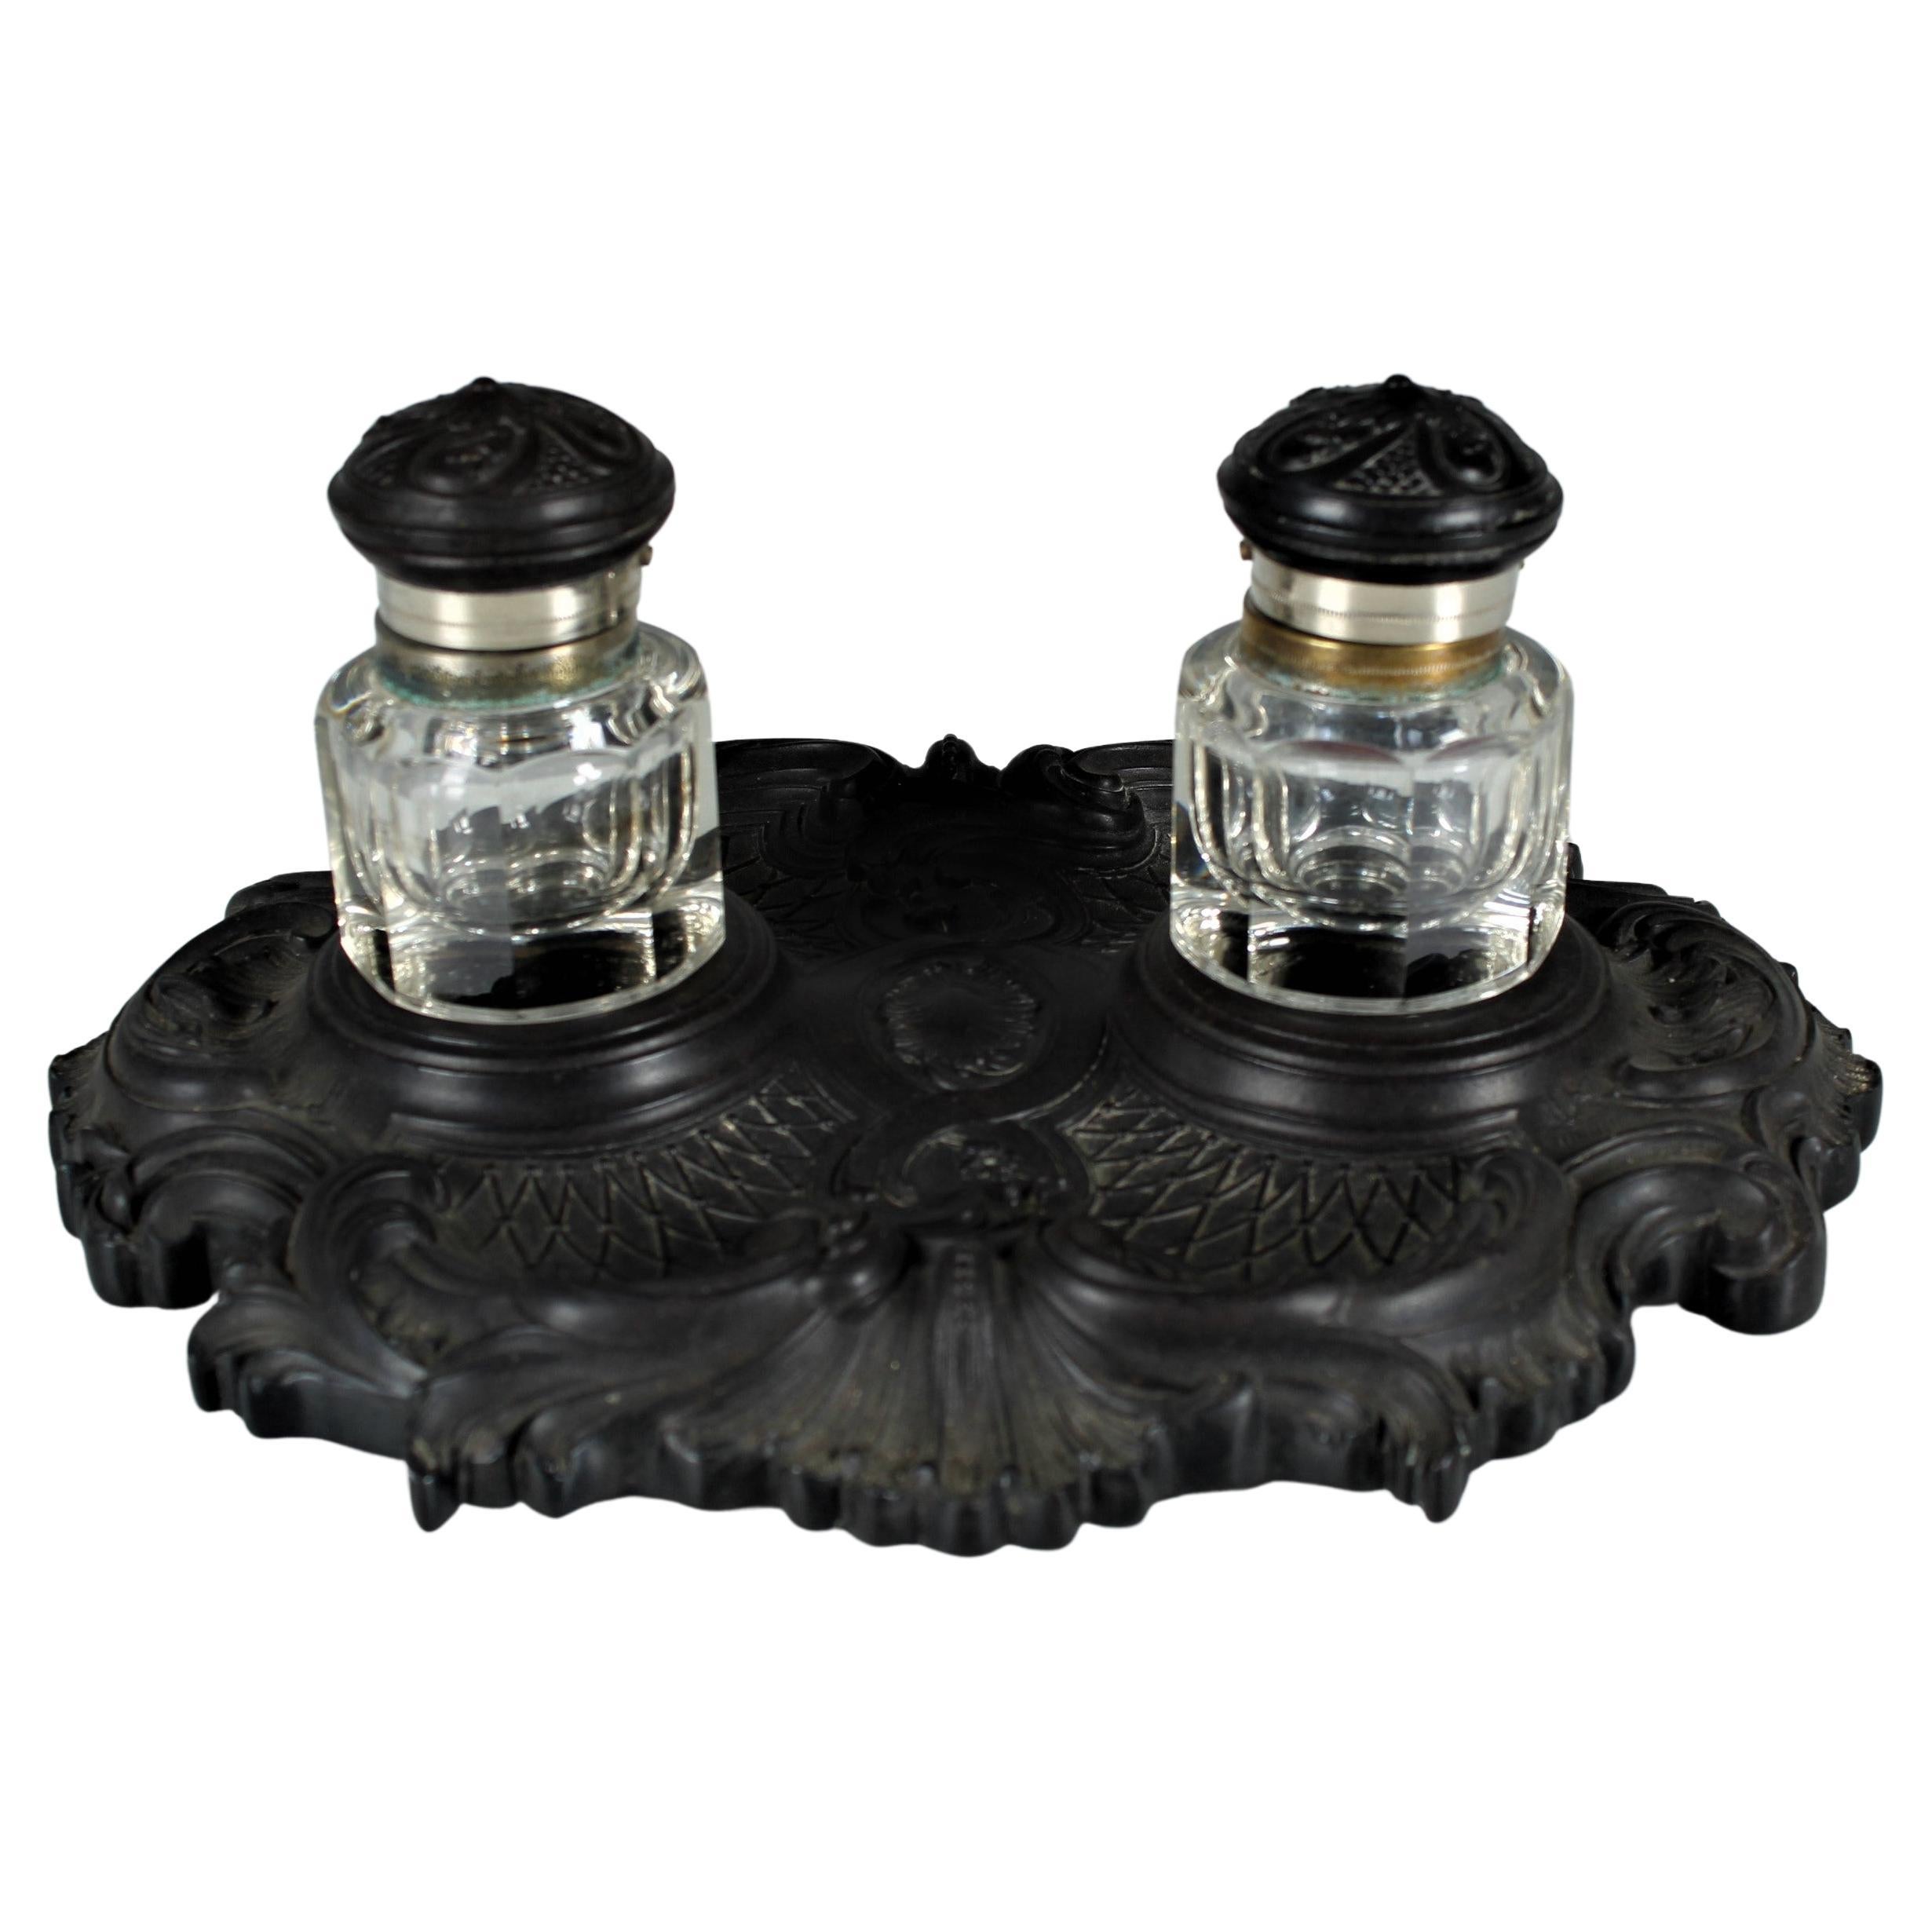 Antique Double Inkstand With Glass Inserts, Gutta-Percha, France, Circa 1880